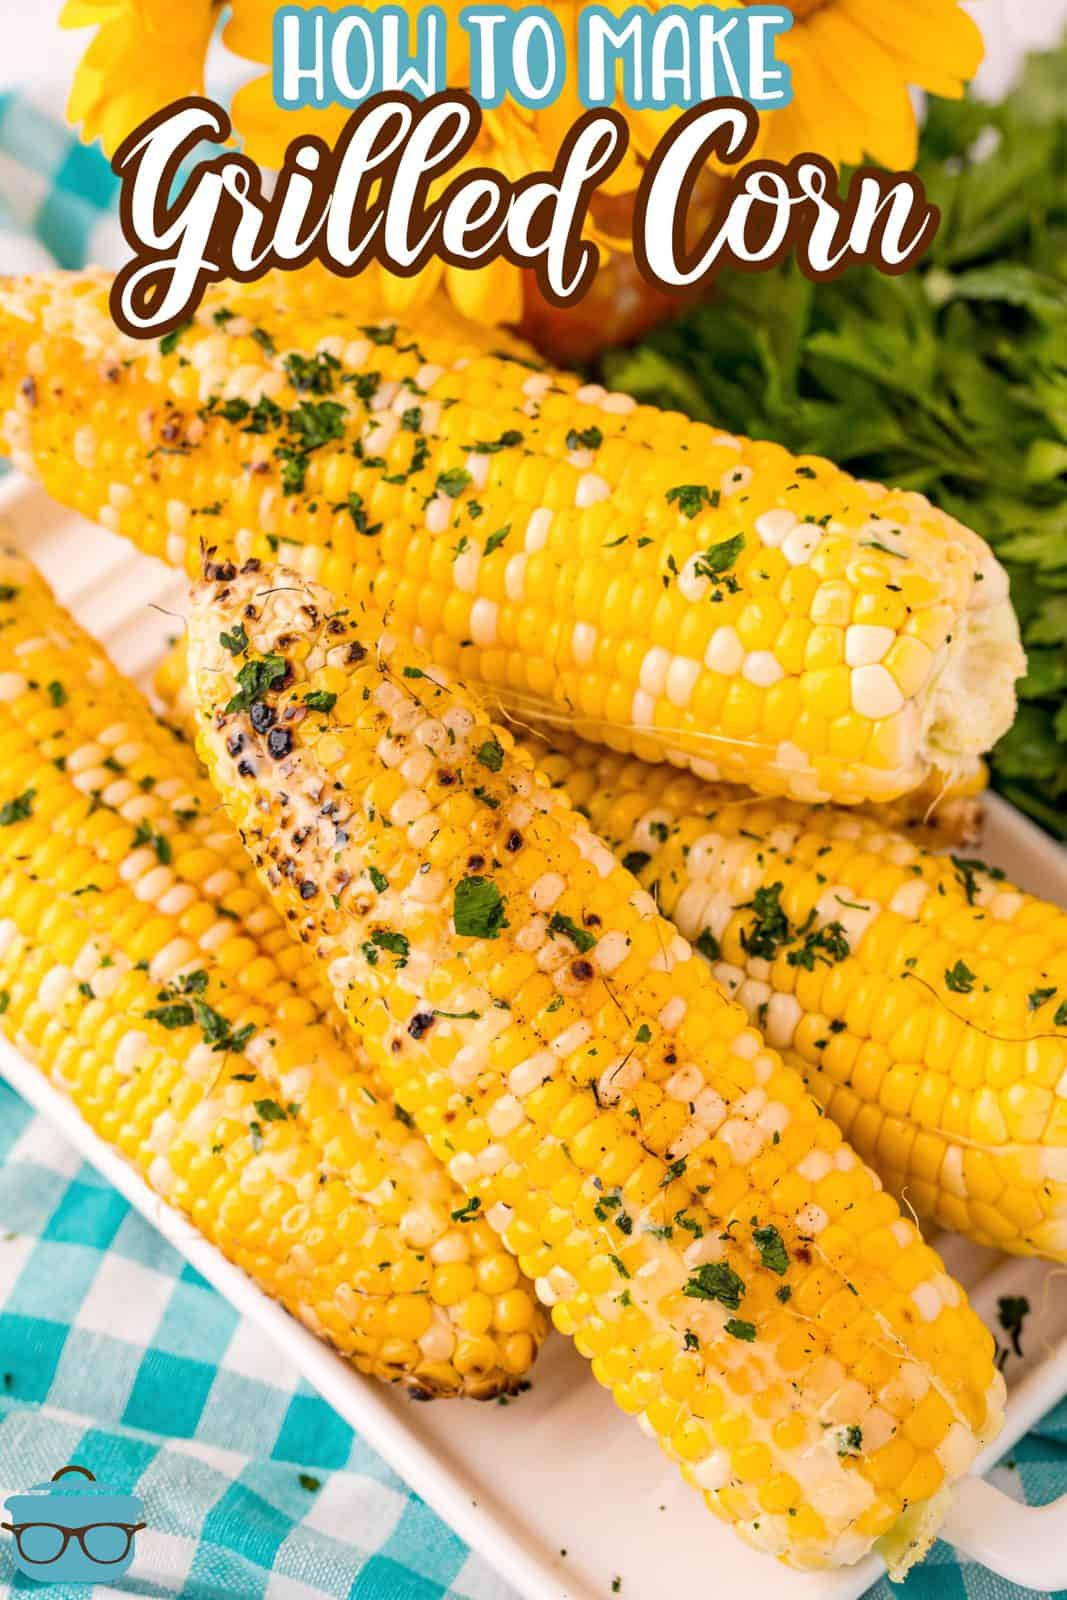 Pinterest image of stacked corn on white platter with butter and herbs.